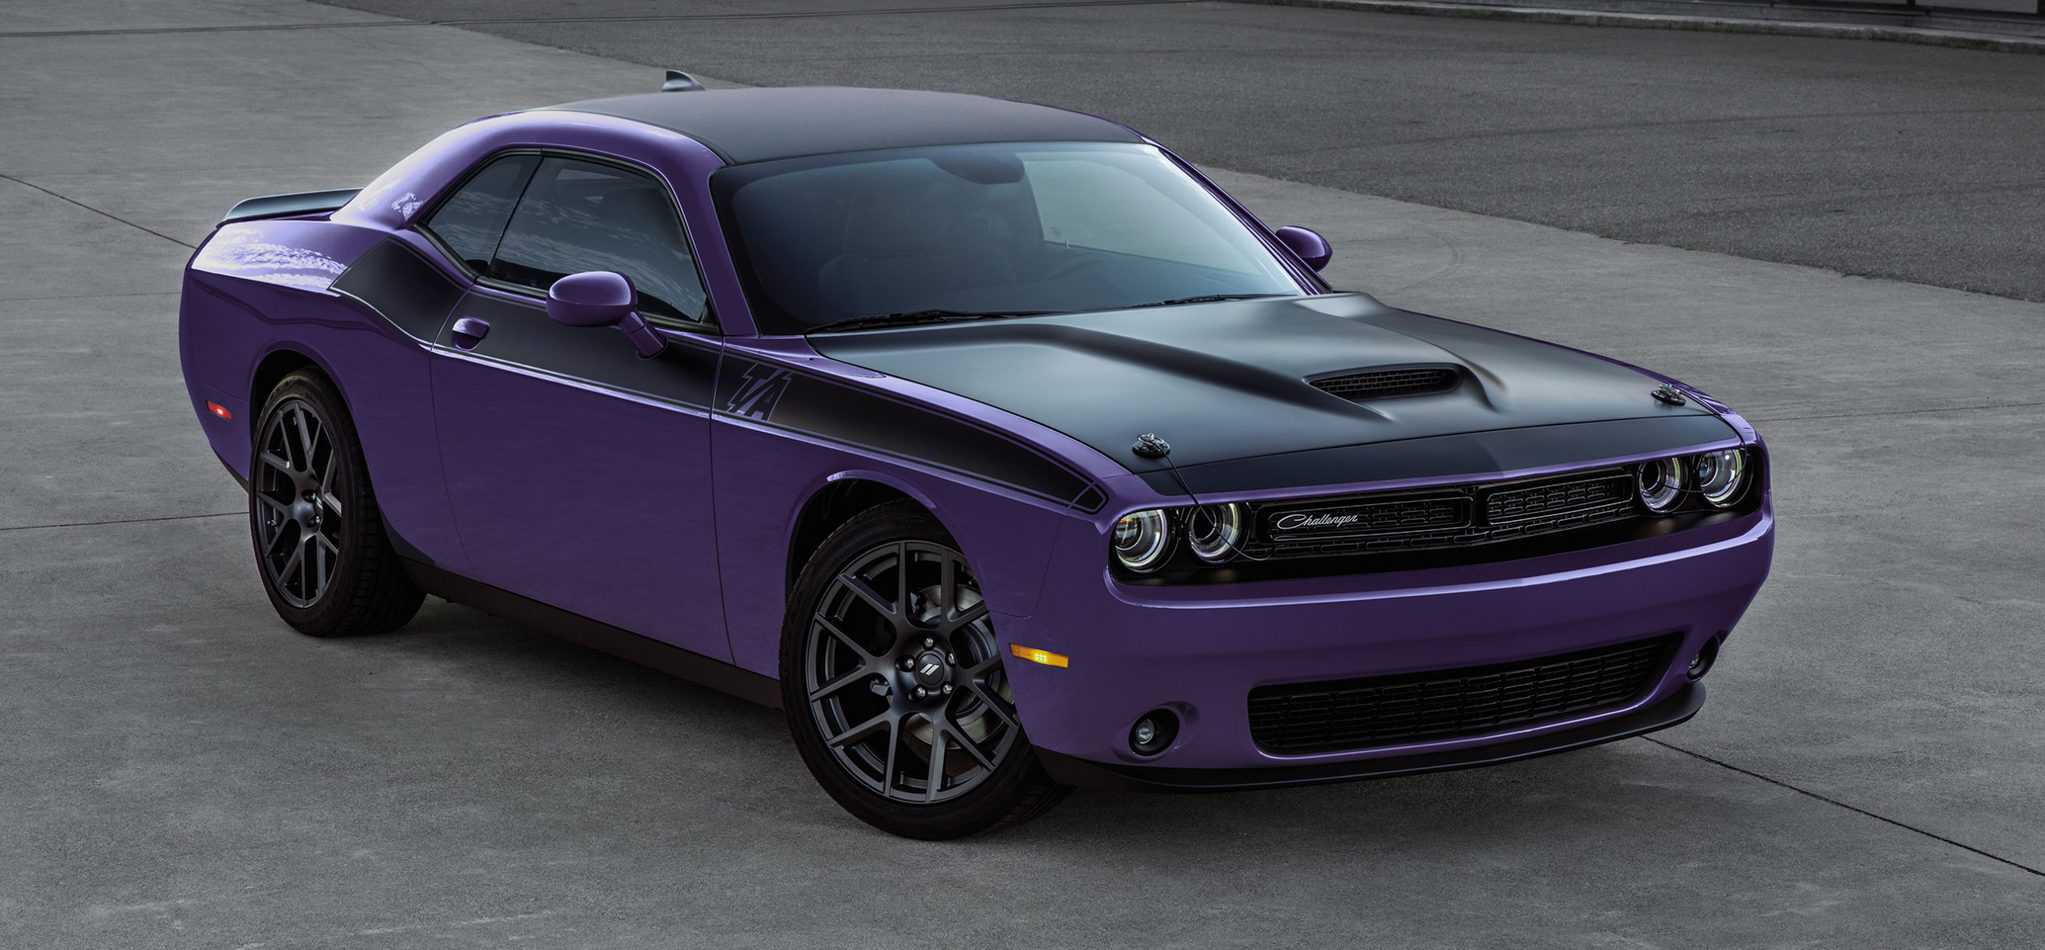 Why has Purple Never Been a Popular Color for Cars? Car